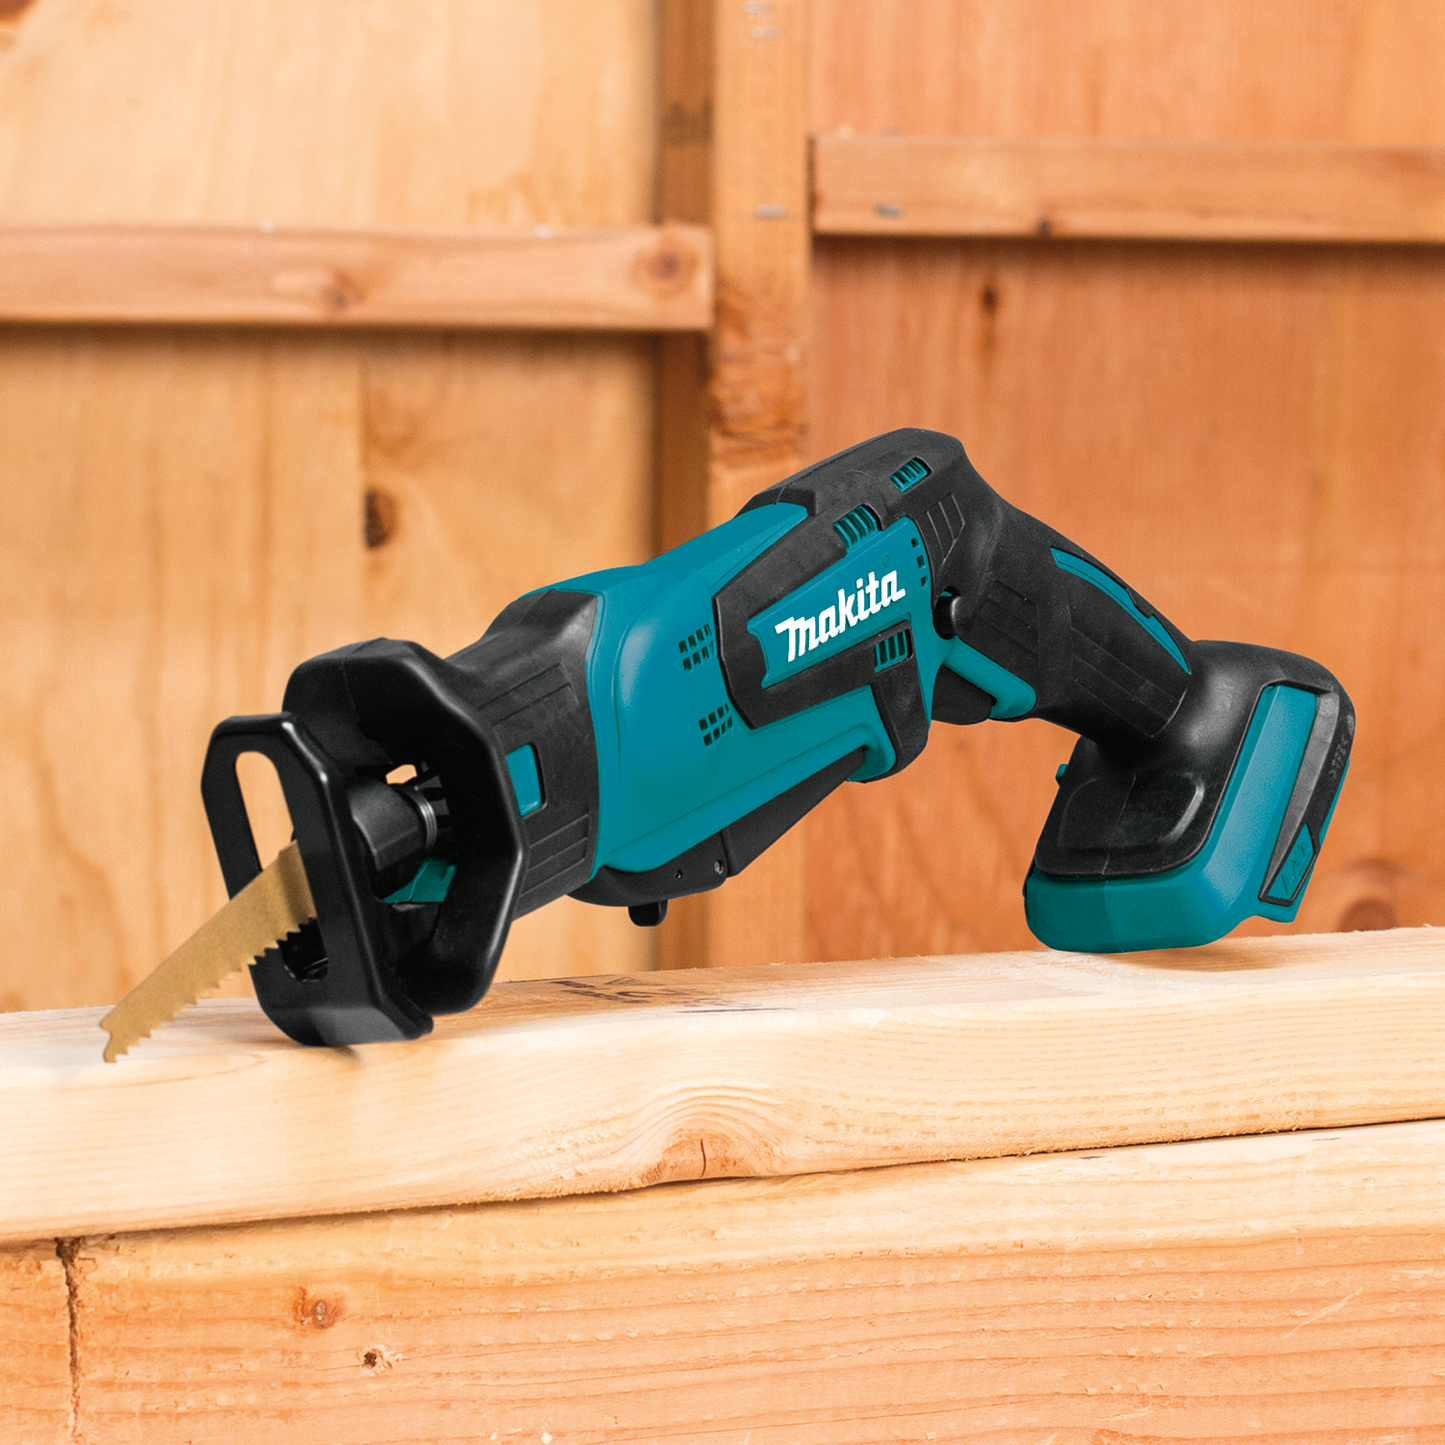 Makita 18 Volt Lithium Ion Cordless Reciprocating Saw Factory Serviced (Tool Only)